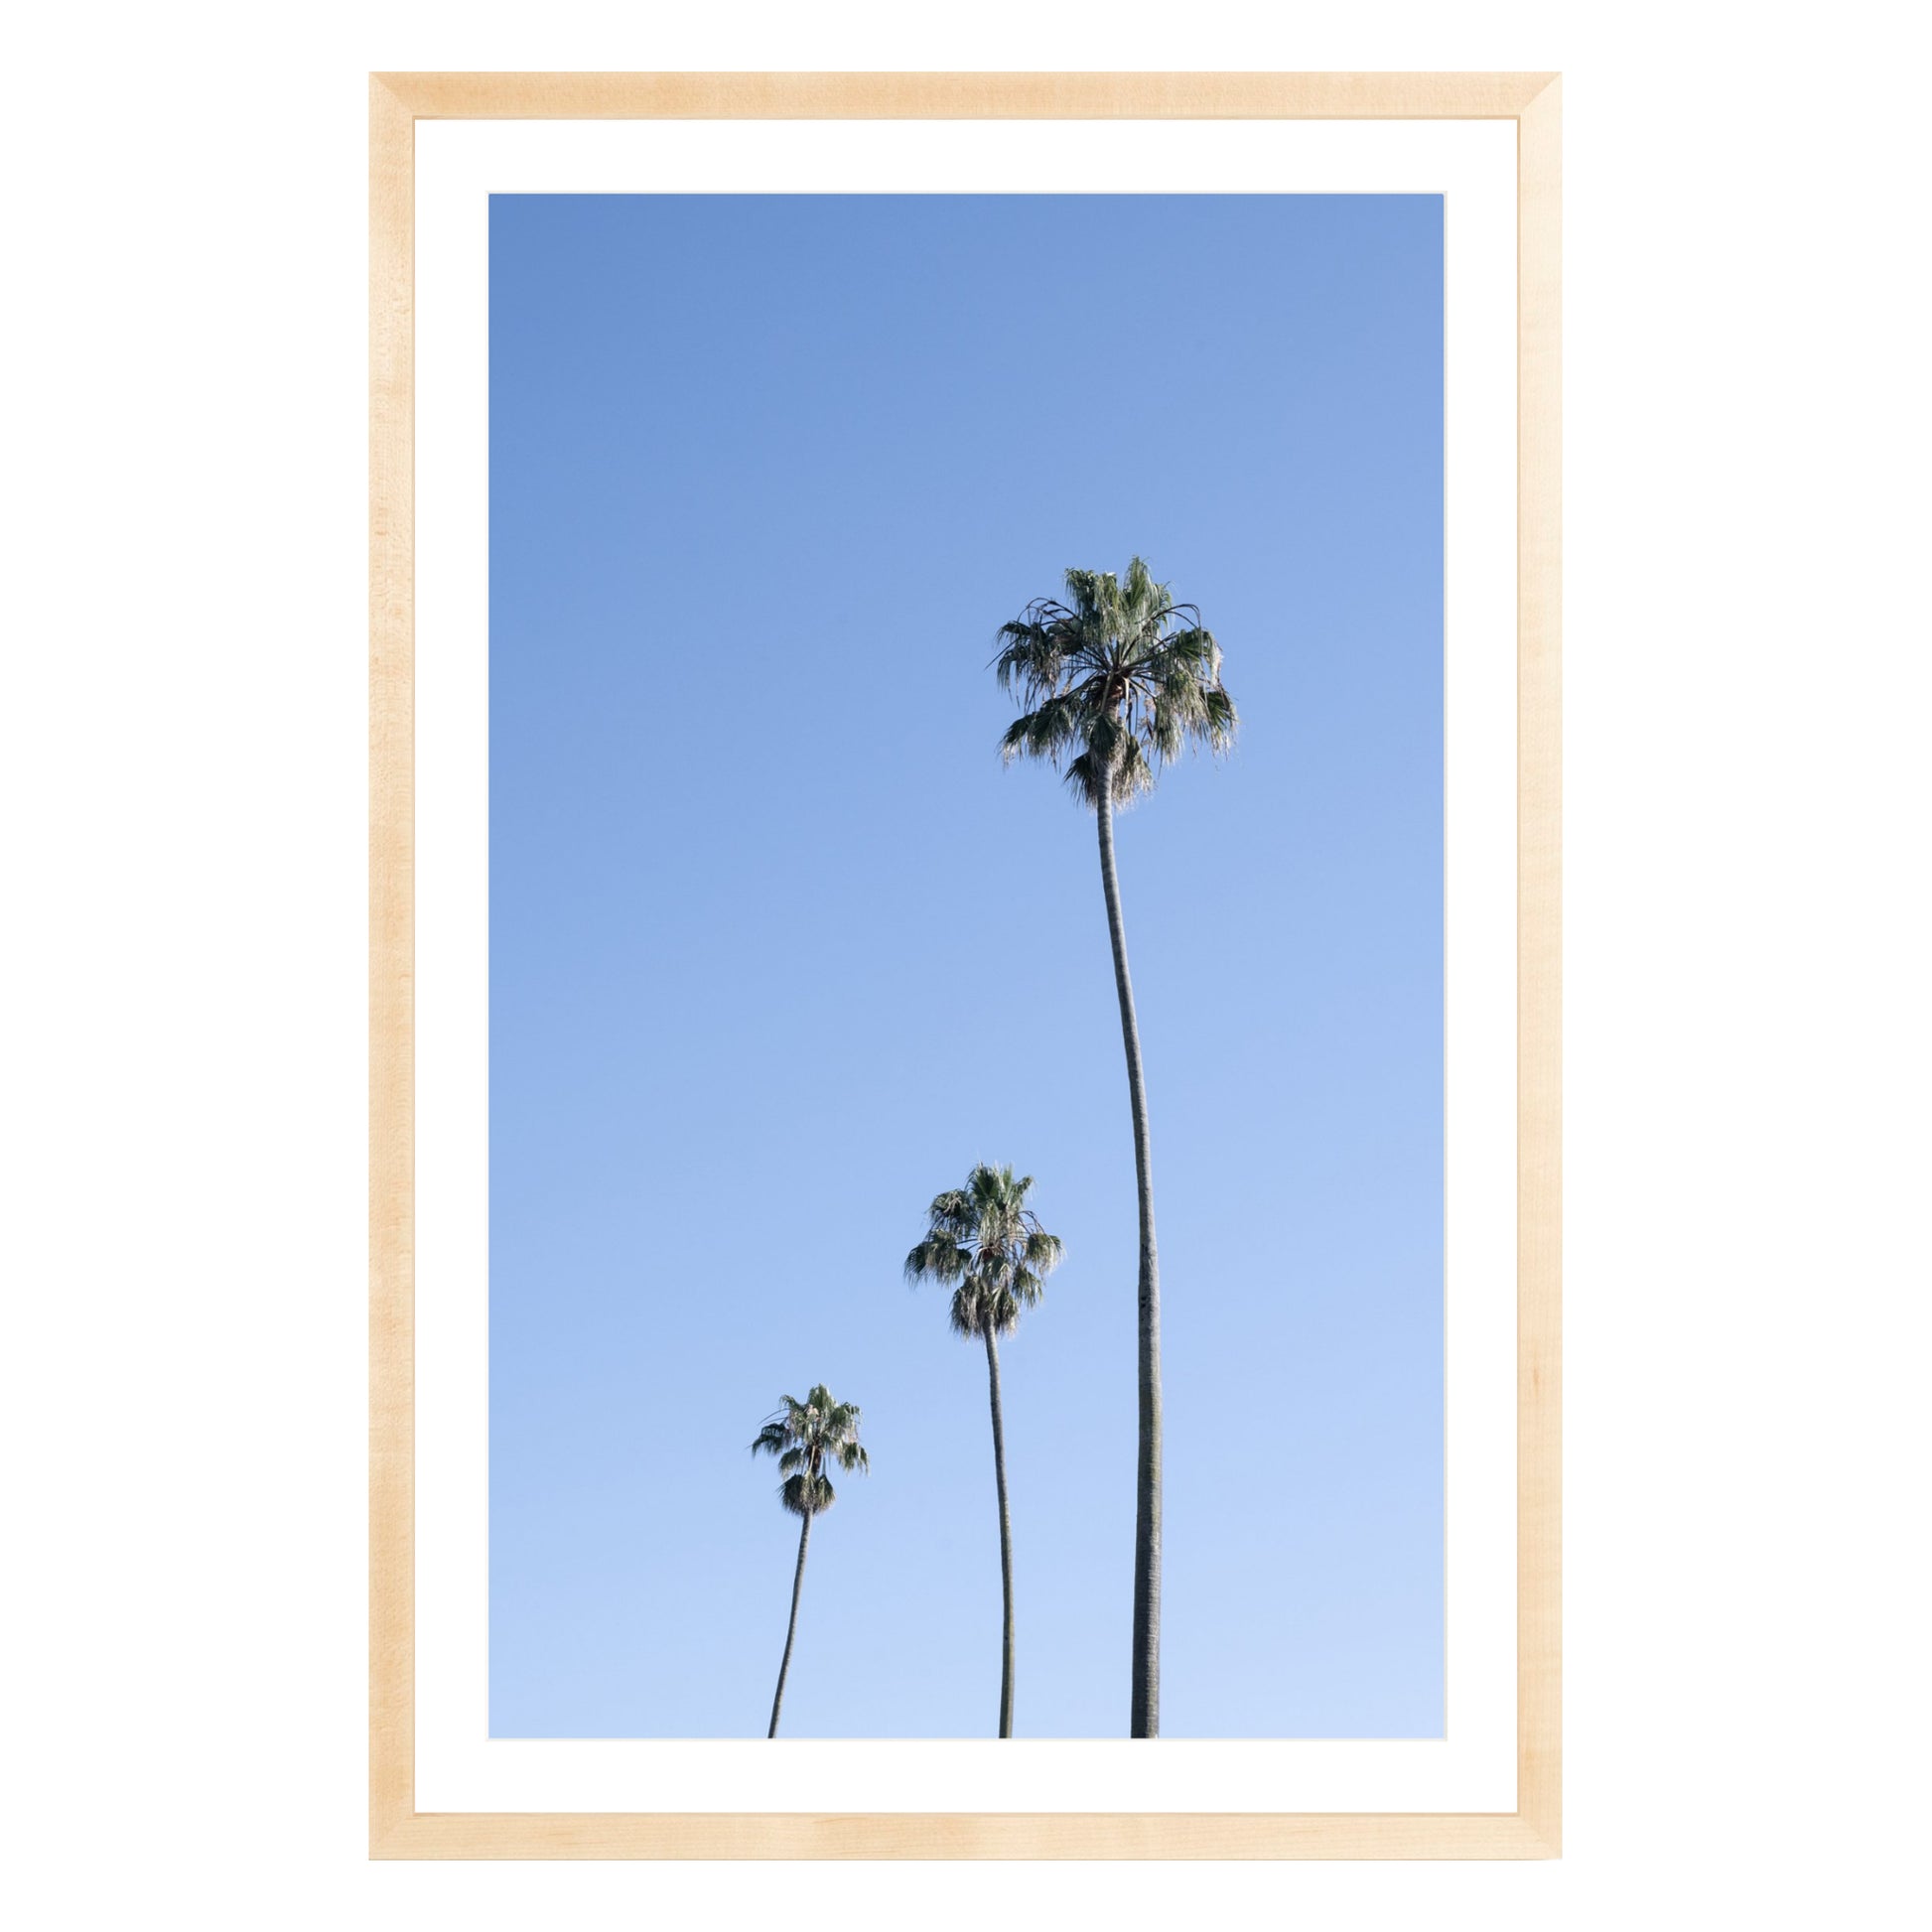 Photograph of three palm trees against blue sky framed in natural wood with white mat